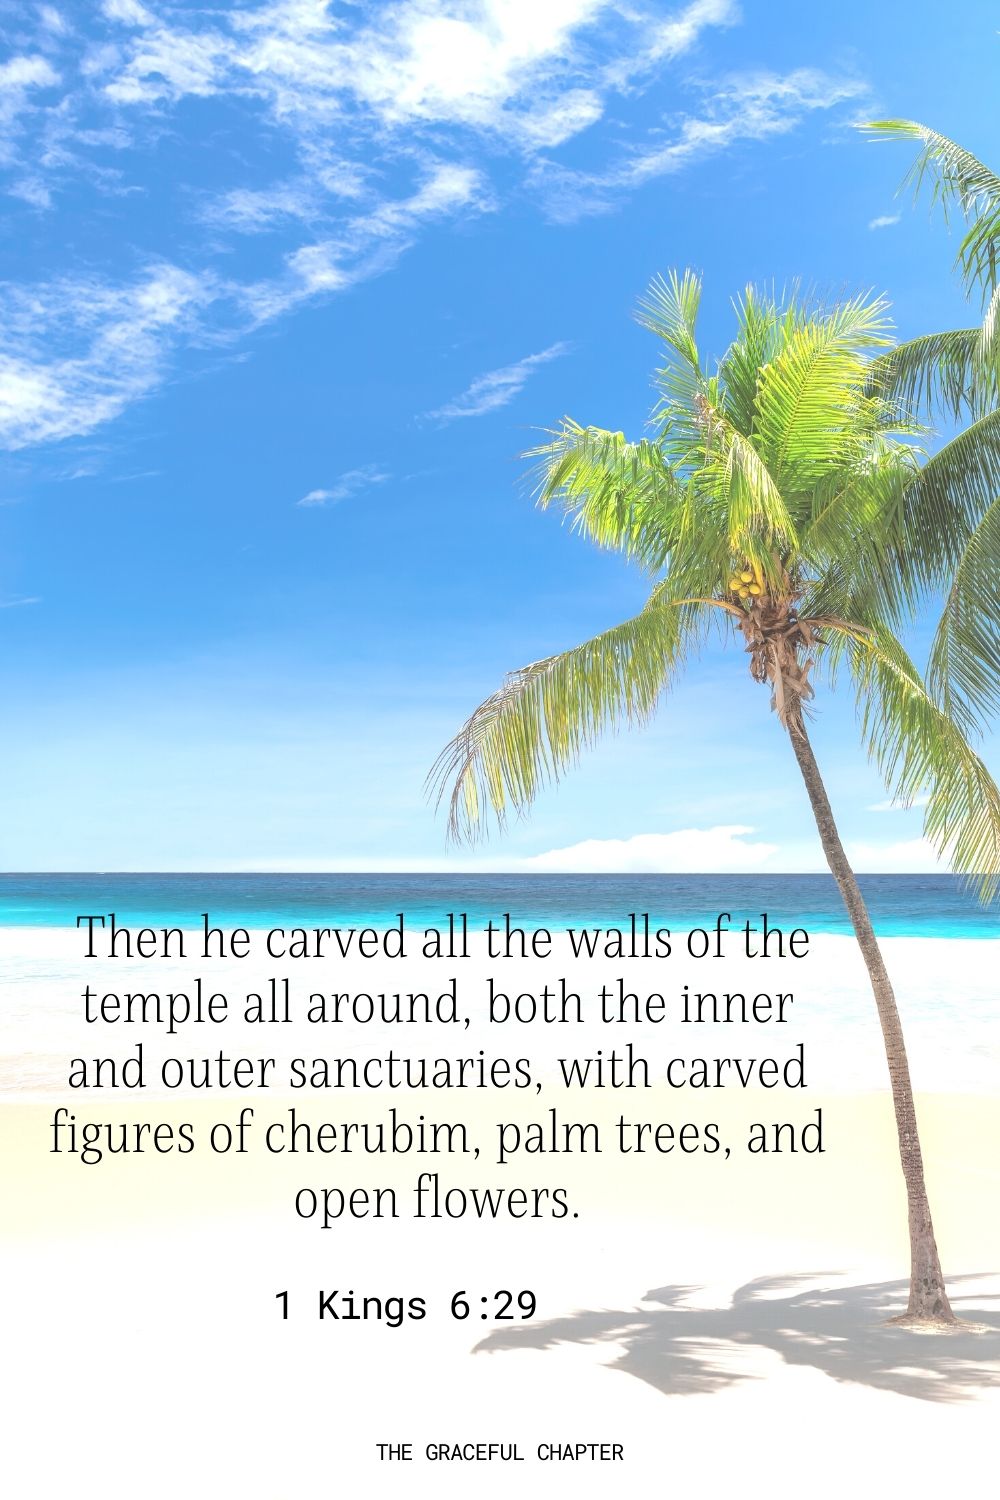  Then he carved all the walls of the temple all around, both the inner and outer sanctuaries, with carved figures of cherubim, palm trees, and open flowers. 1 Kings 6:29